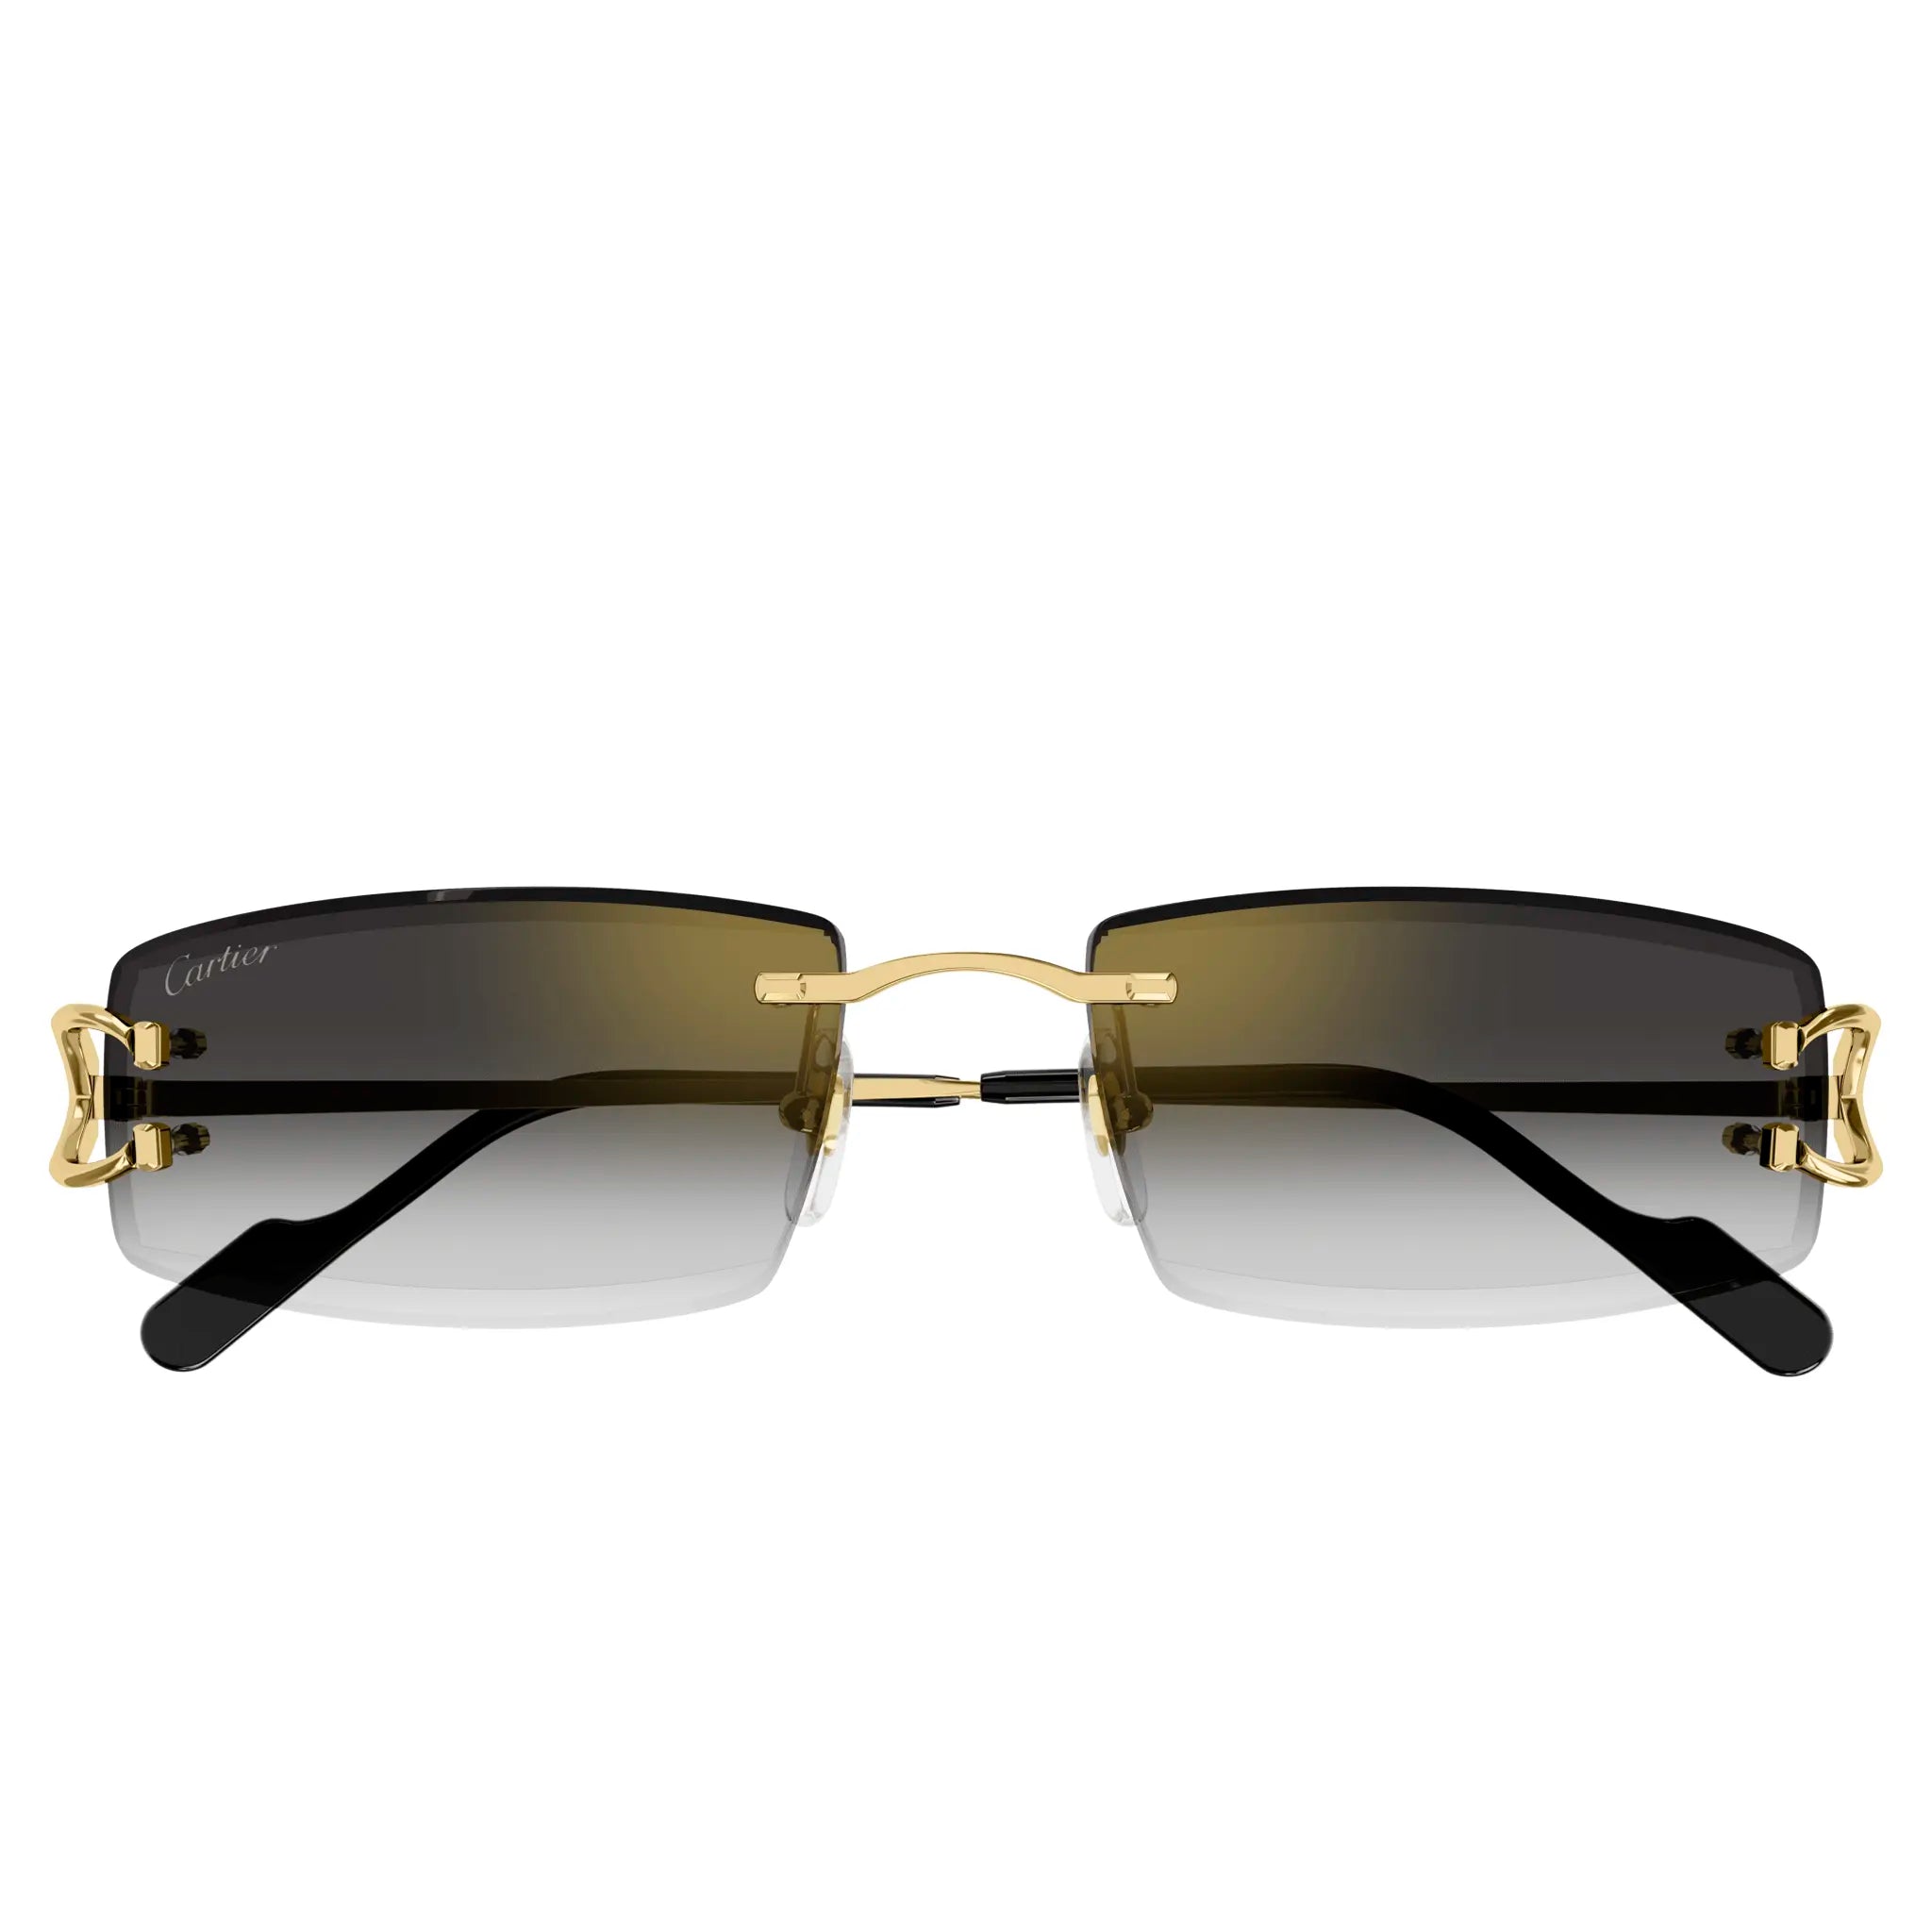 Folded view of Cartier Eyewear CT0465S-001 Gold Grey Rimless Sunglasses